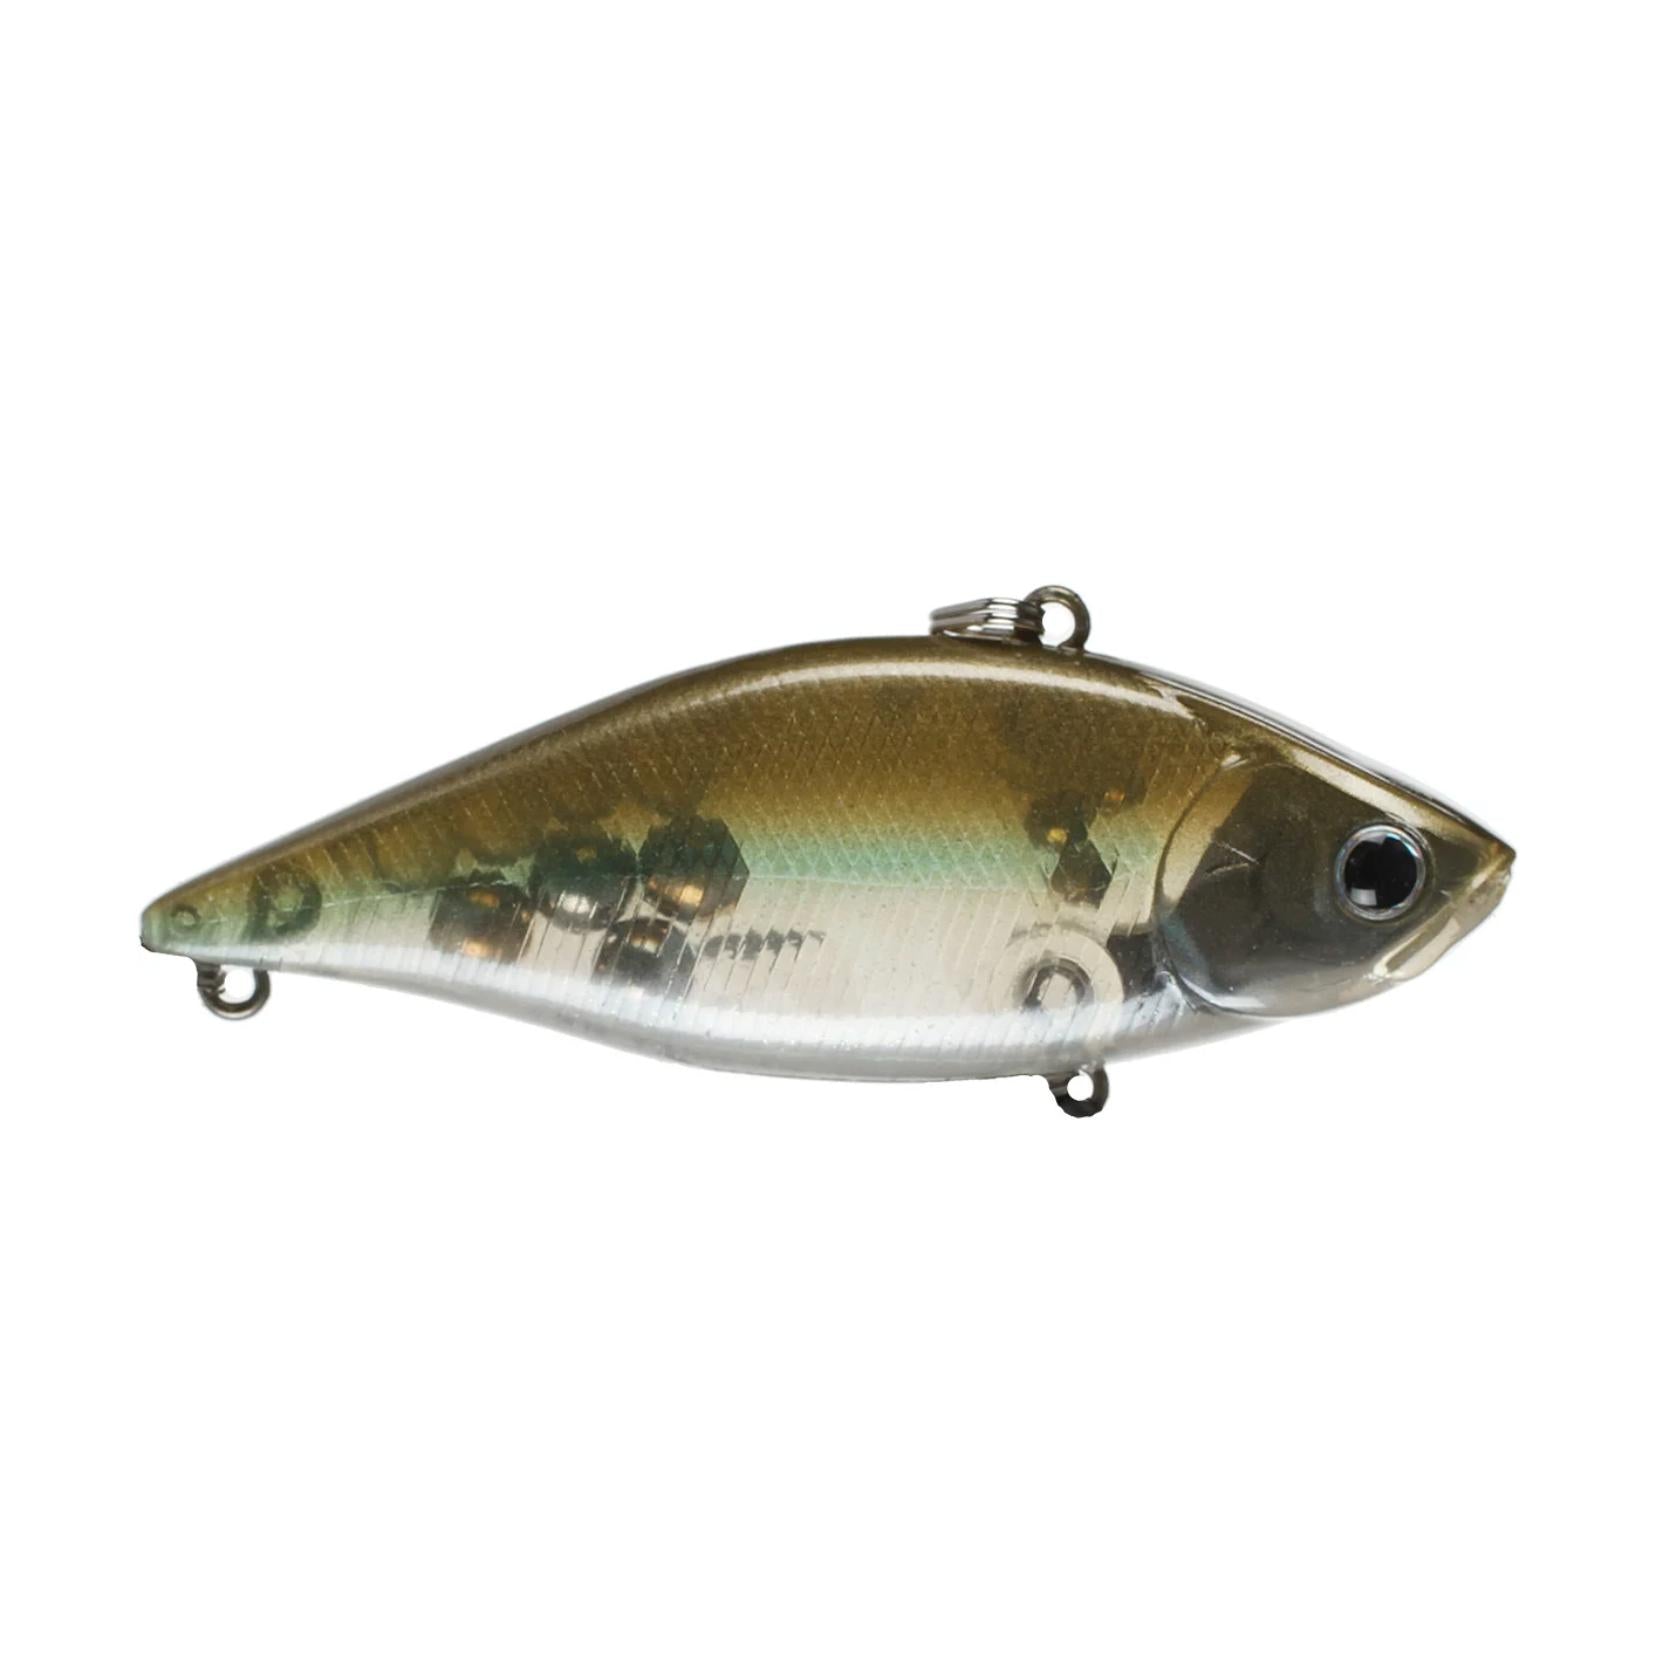 Lucky Craft LV Max 500 Lipless Crankbait, Be Gill